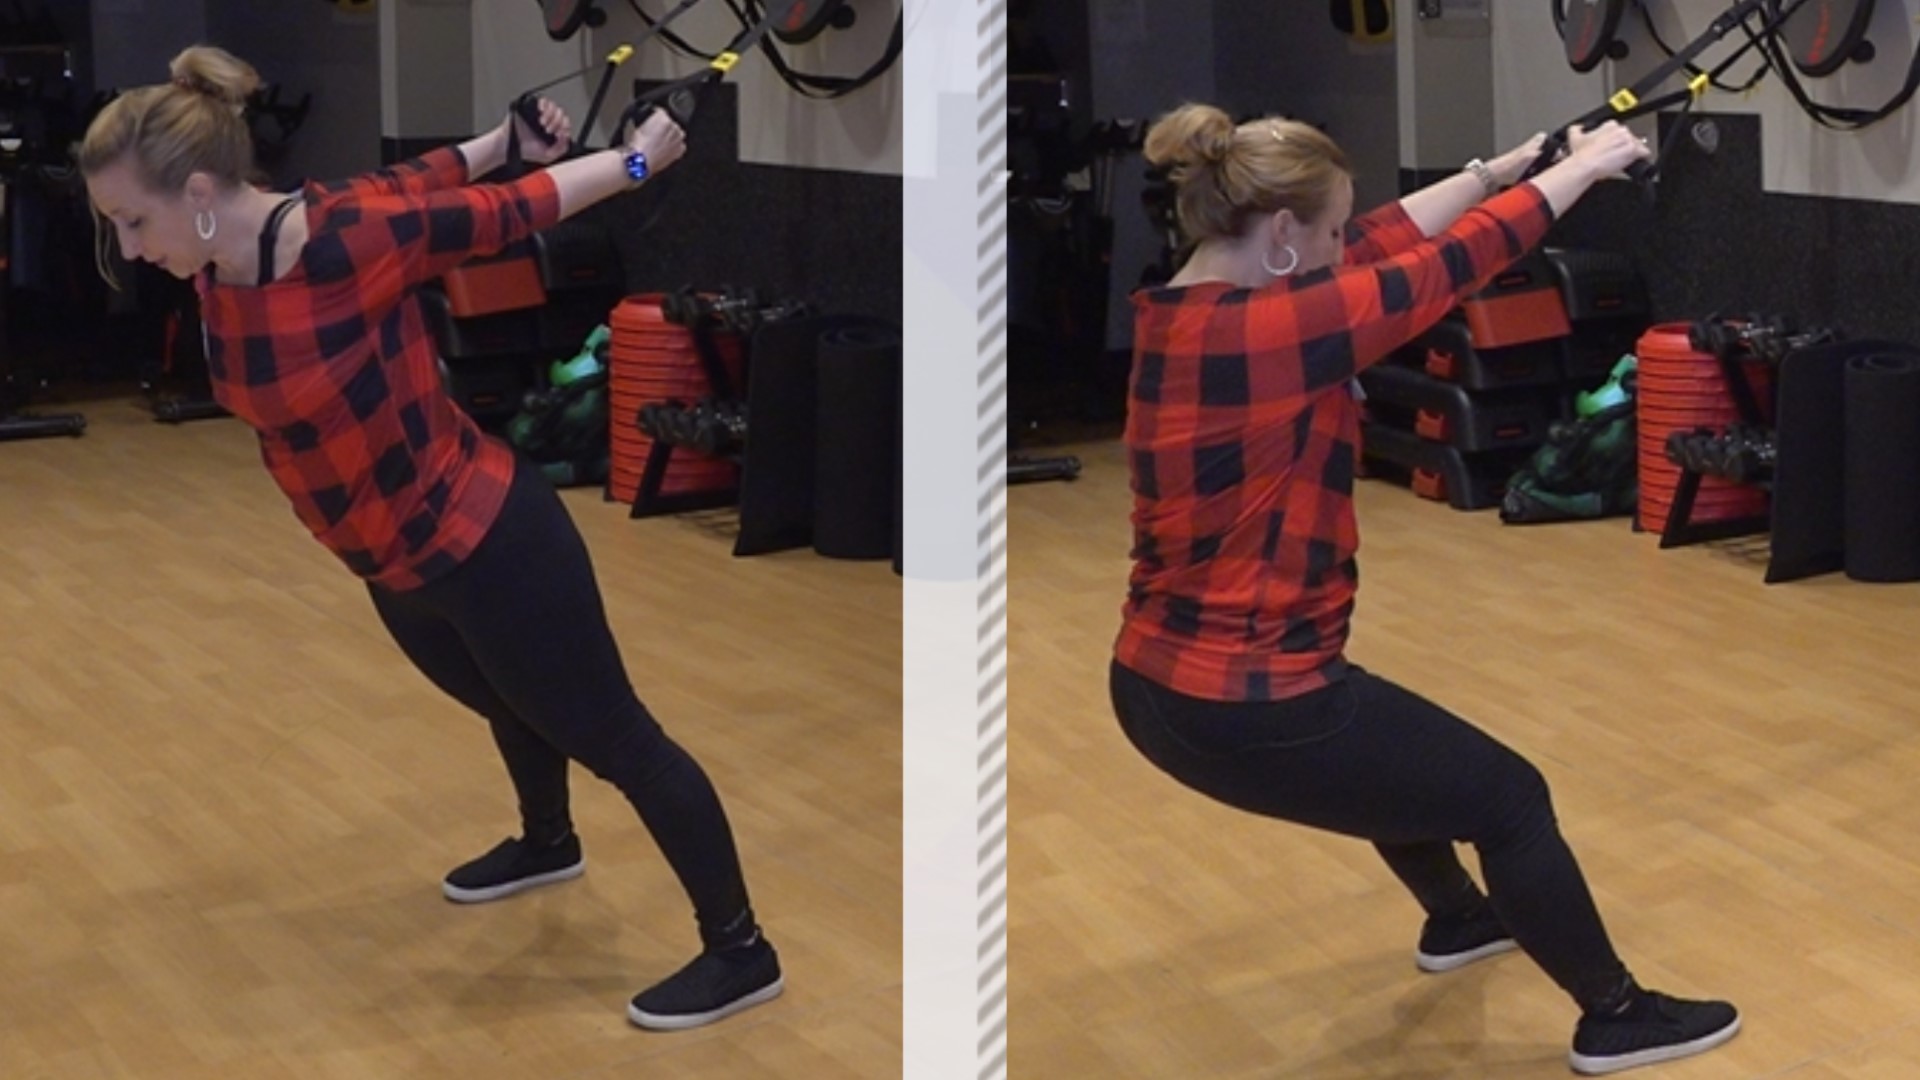 TRX or Total Body Resistance Exercise straps are great for all types of workouts. In this week's FitMinute the JCC shows off two stretches using the equipment!